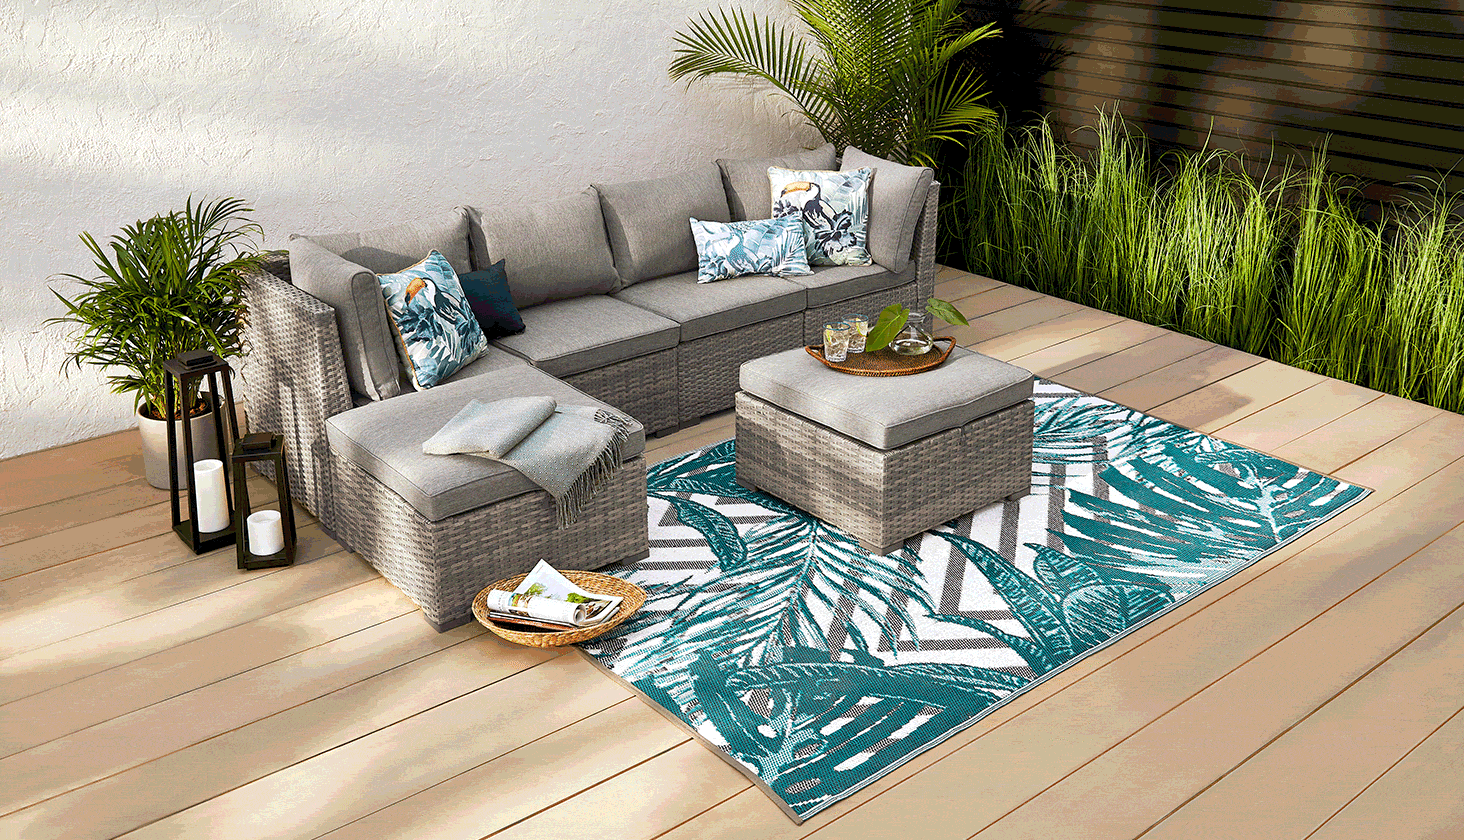 CANVAS Bala 6-piece Sectional Set set up on a patio with ottoman and tropical printed rug.